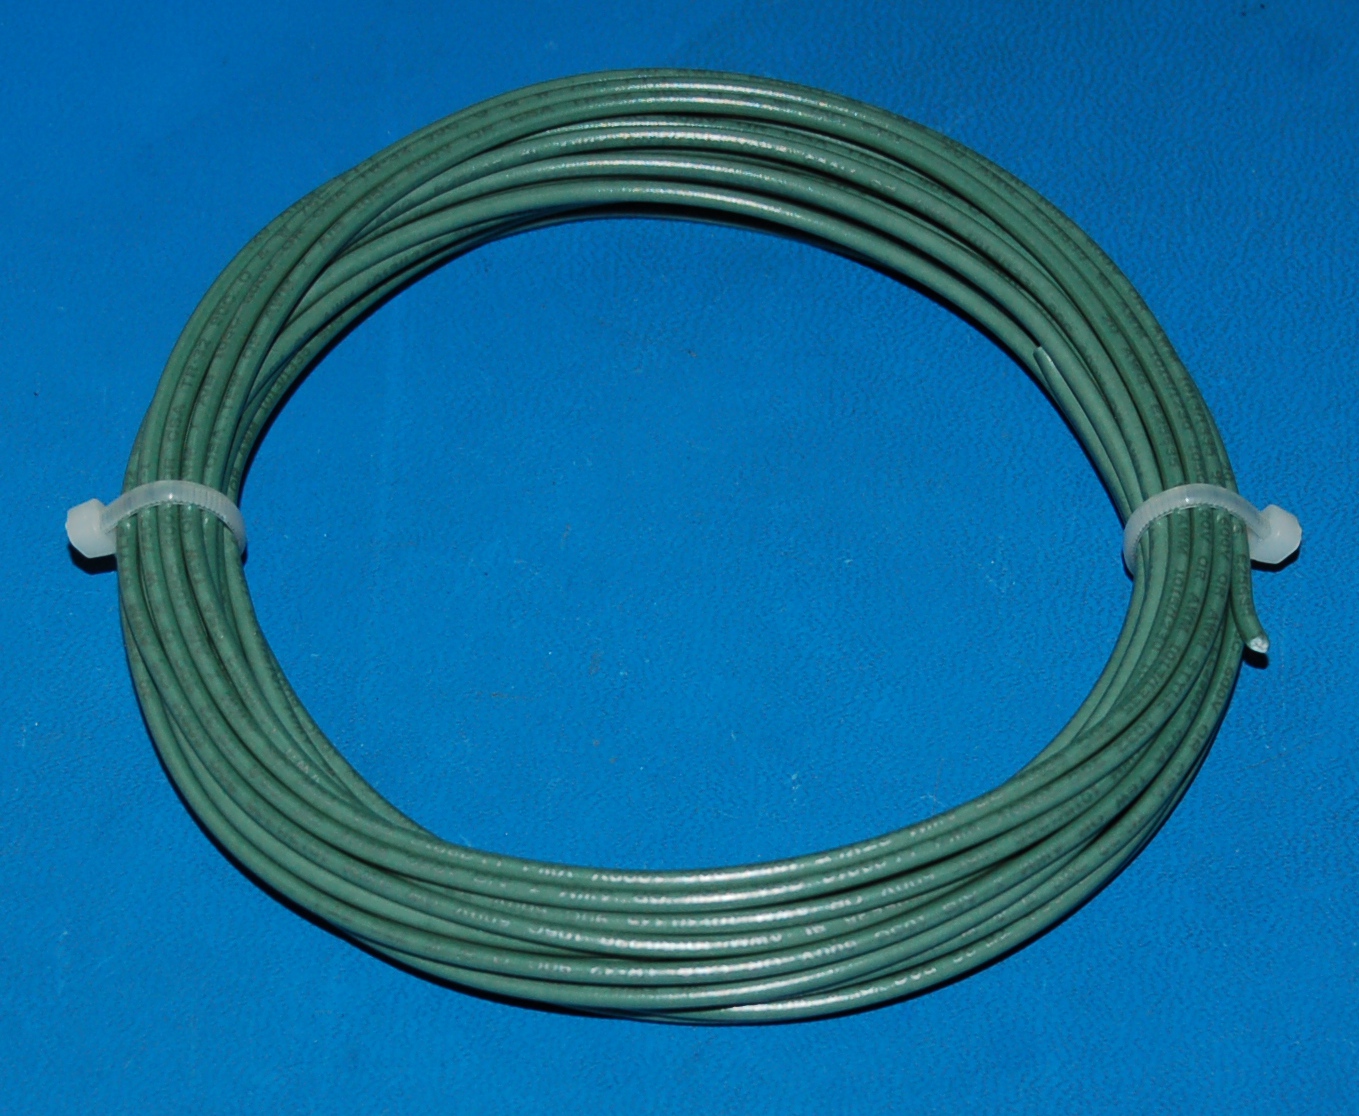 Solid Tinned Copper Wire, 1000V, #20 AWG x 50' (Green) - Cliquez sur l'image pour fermer